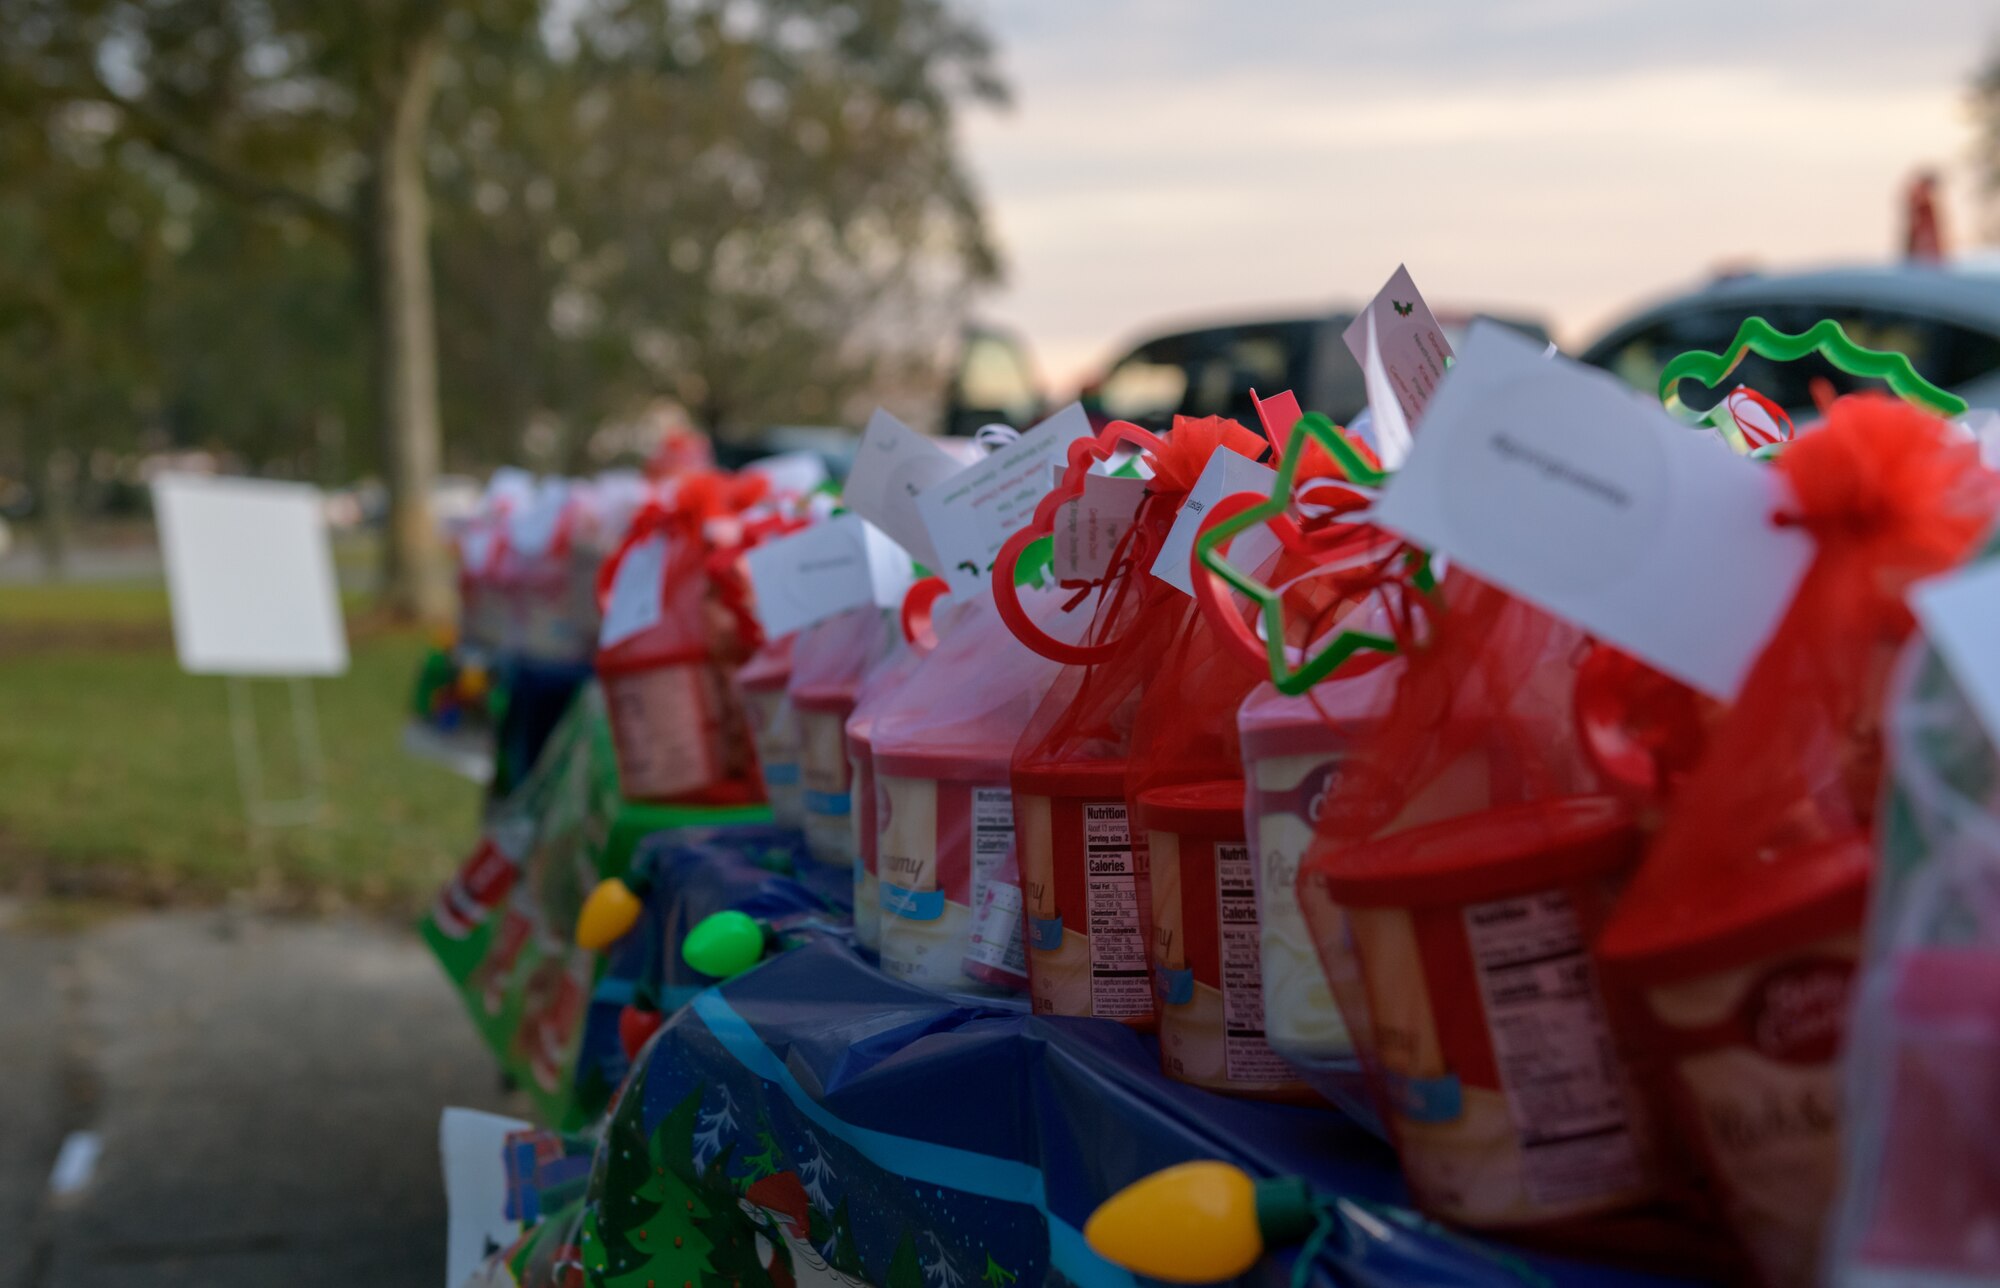 Gifts are on display during Keesler's annual Christmas in the Park drive-thru celebration at Marina Park at Keesler Air Force Base, Mississippi, Dec. 4, 2020. The celebration, hosted by Outdoor Recreation, included light displays, hot chocolate and letters to Santa. (U.S. Air Force photo by Andre' Askew)